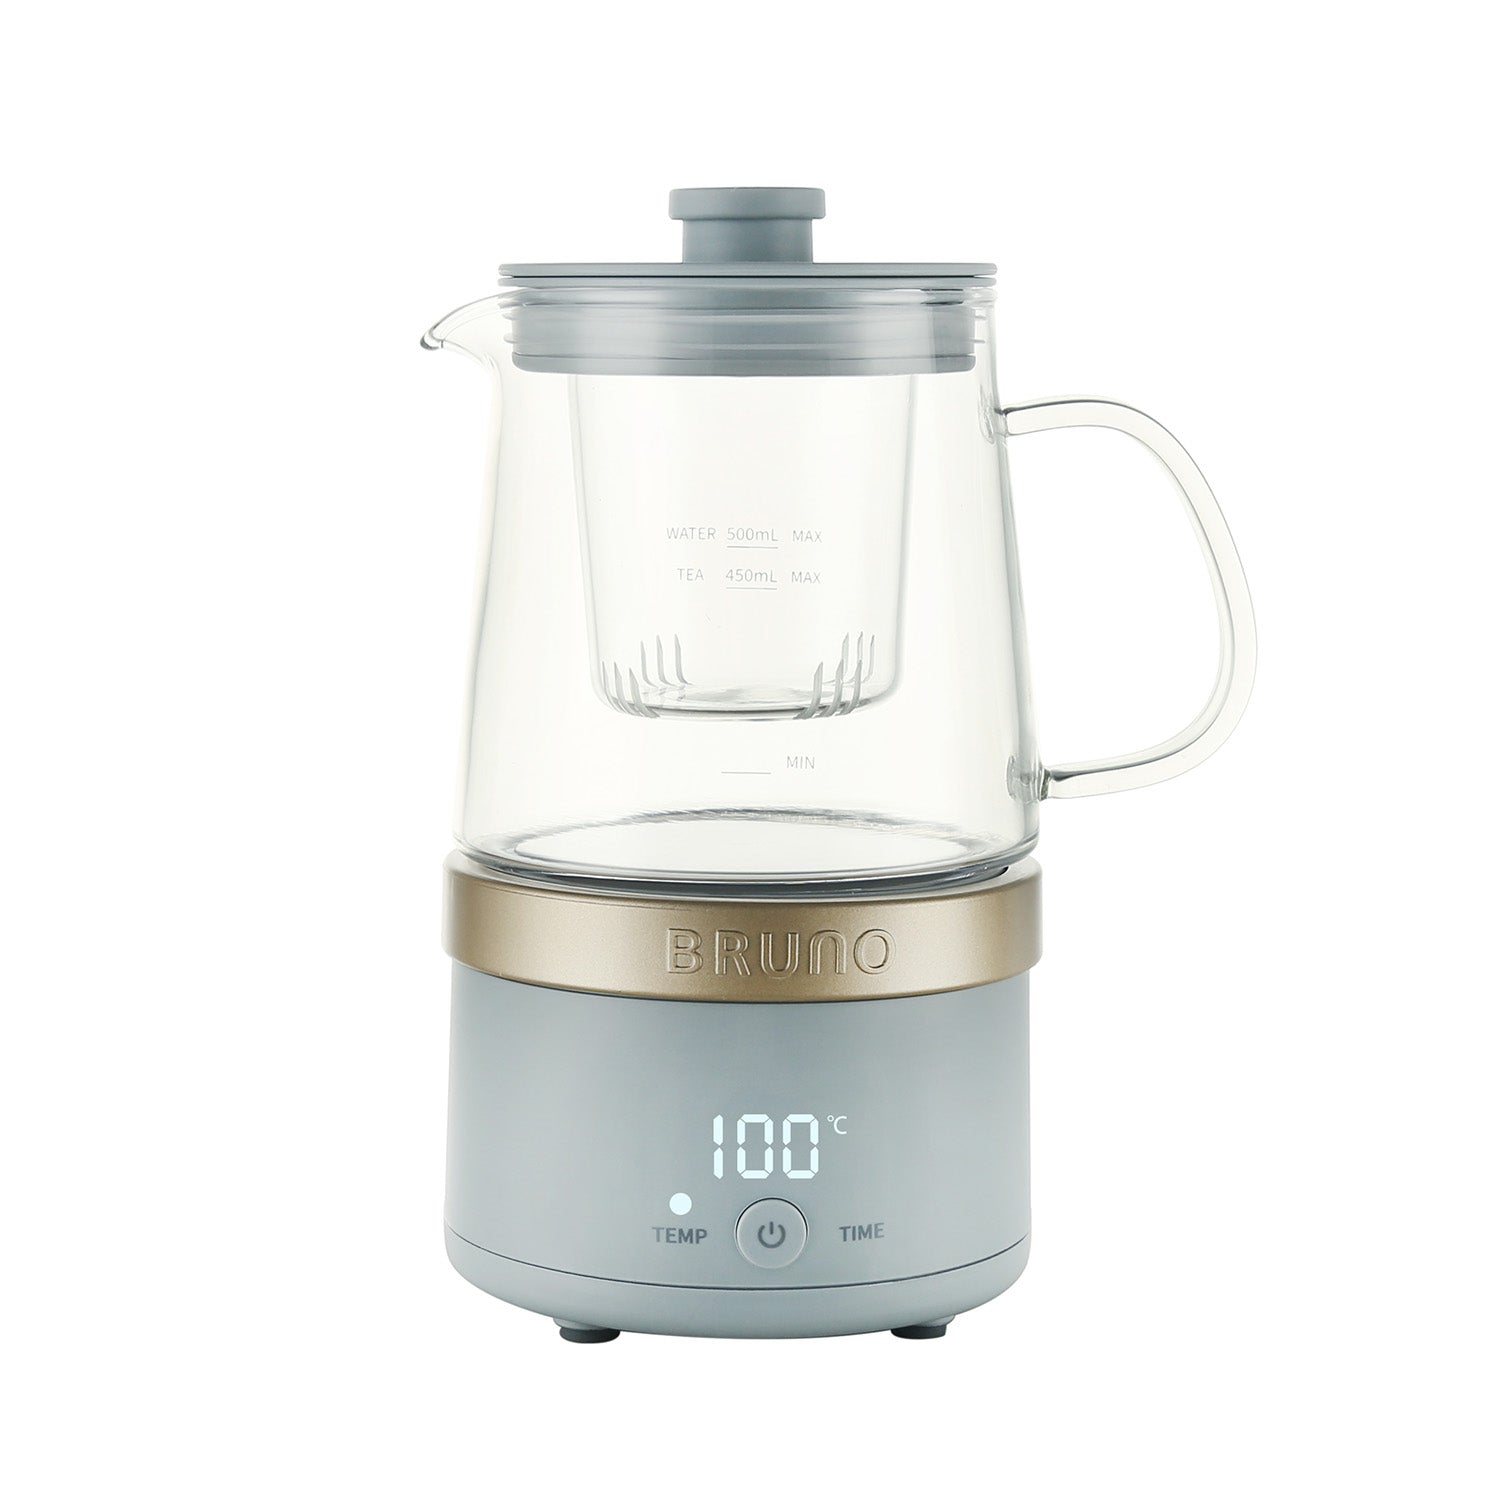 BRUNO Compact Kettle - Blue Gray